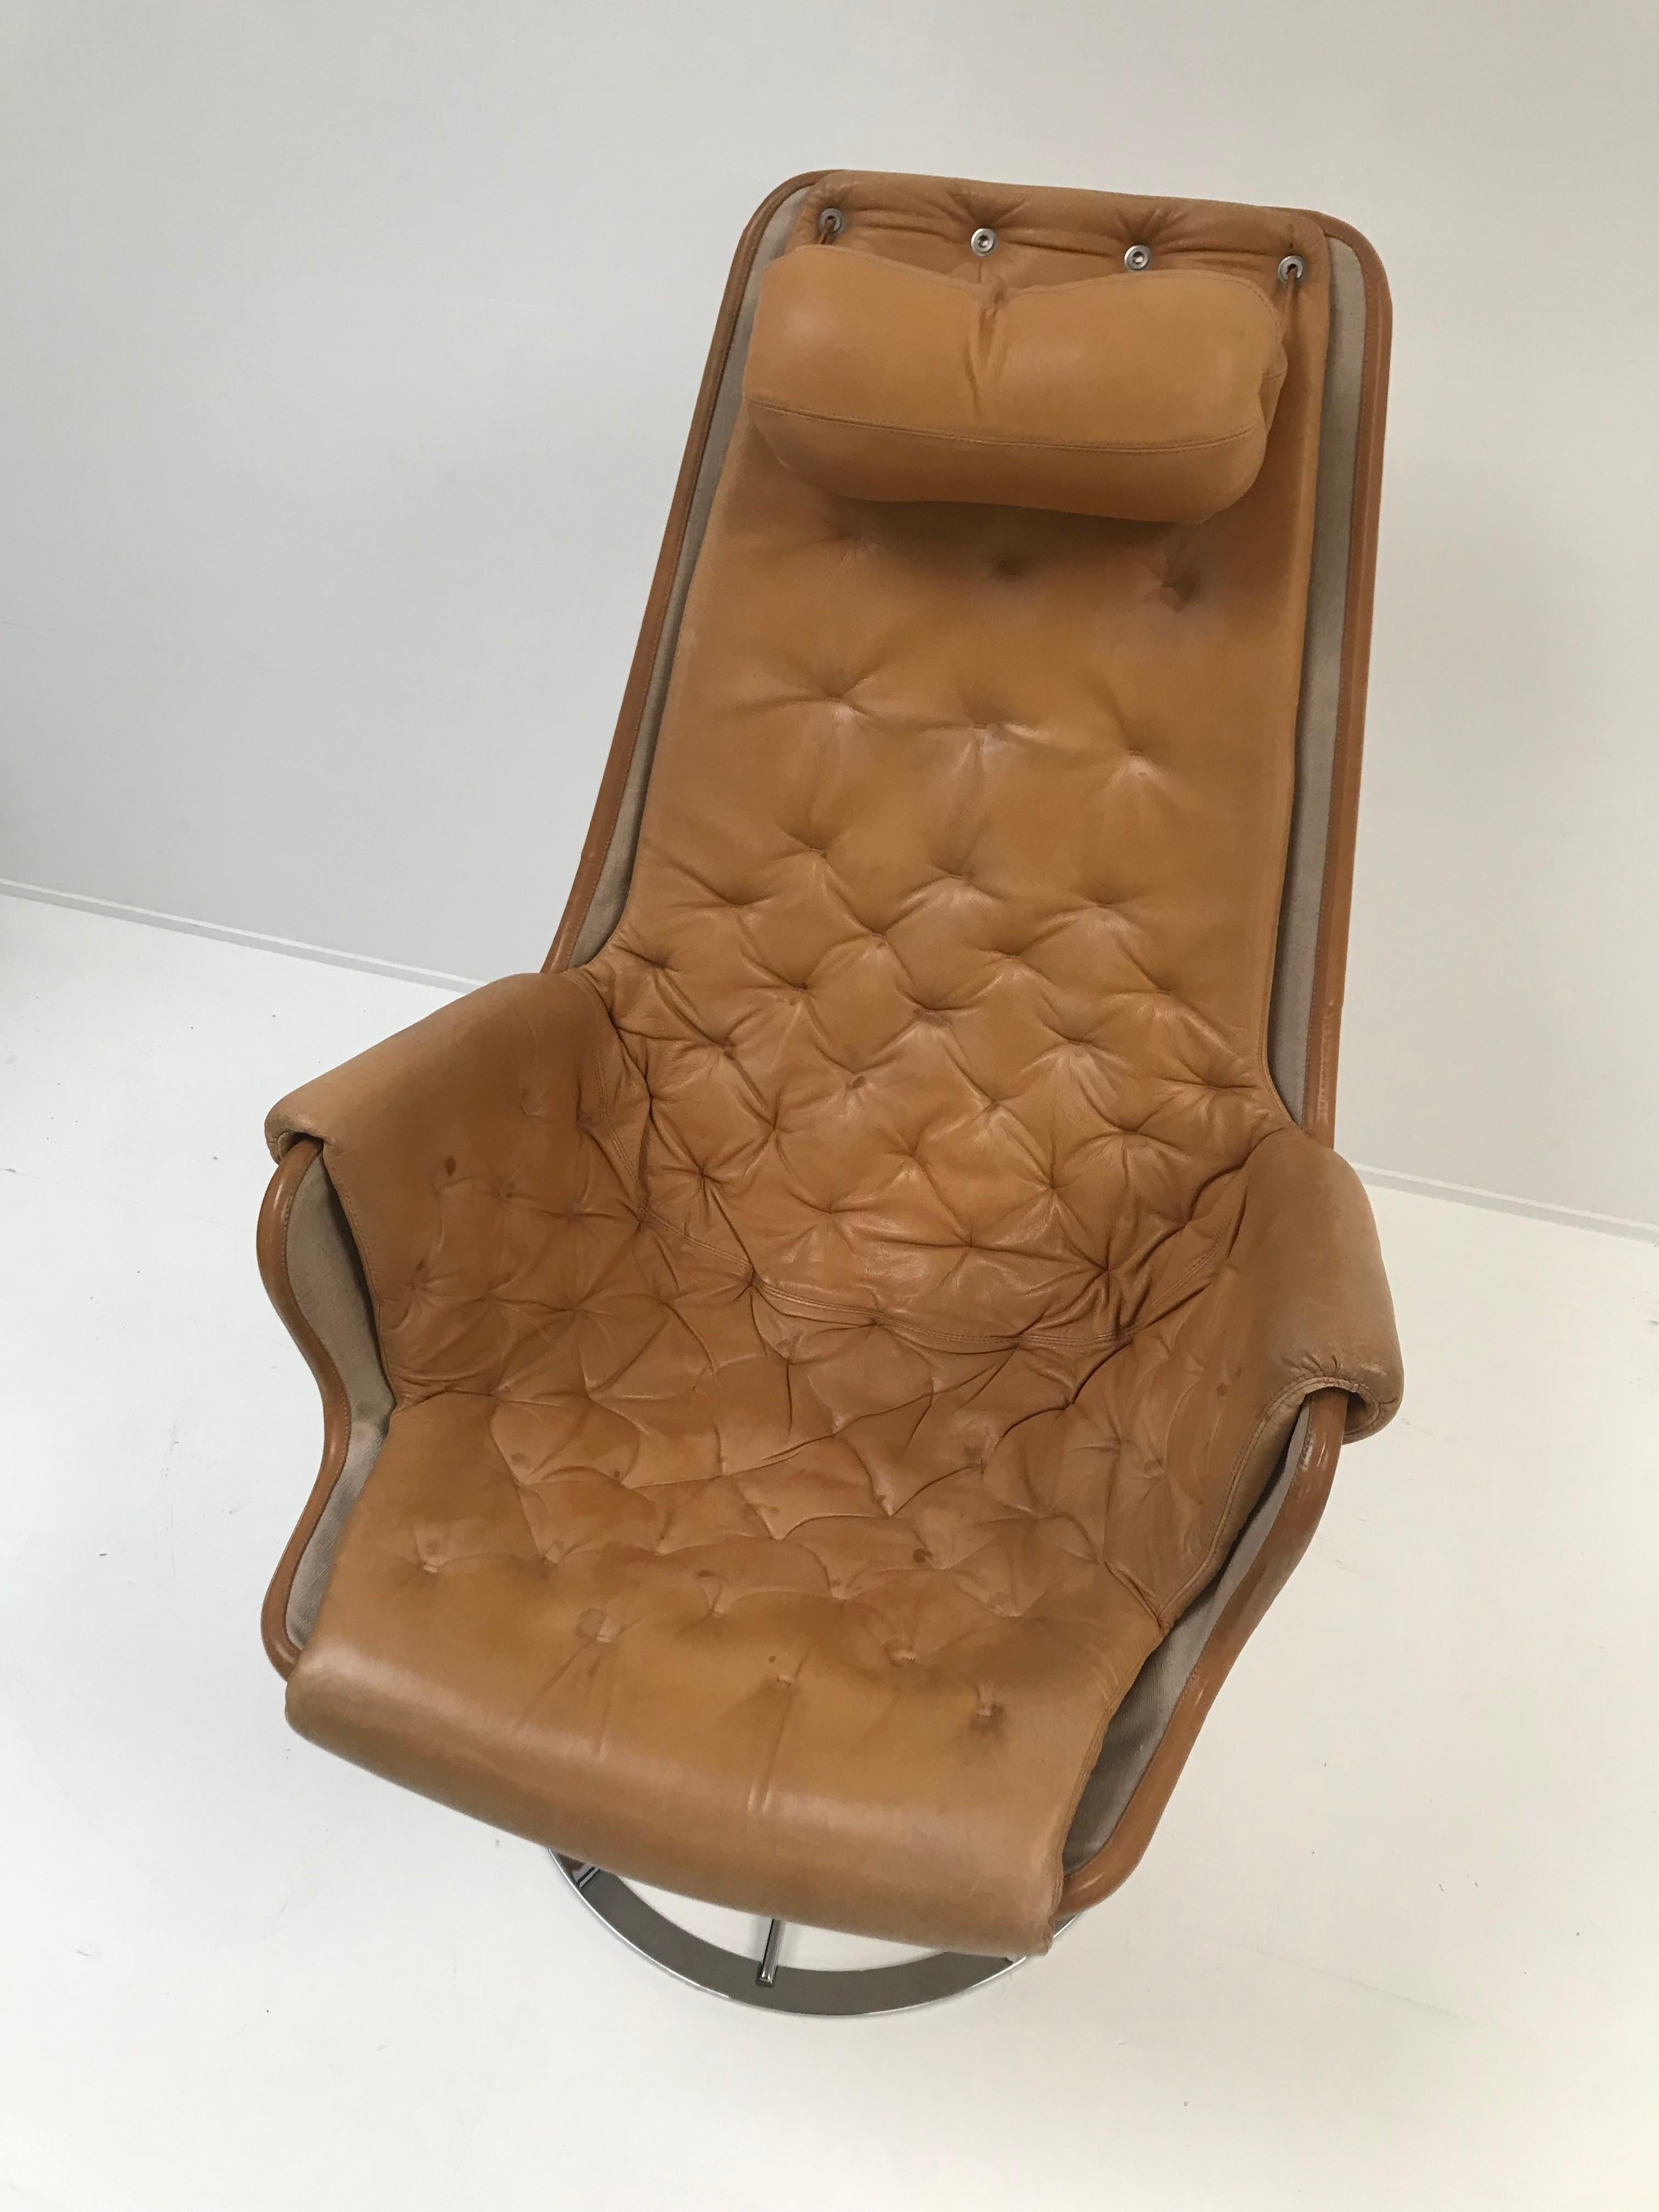 Jetson chair by Bruno Mathsson, 1969 for Swedish Company DUX,
really beautiful brown patinated color, perfect condition and comfortable,
marked with sticker on the base.